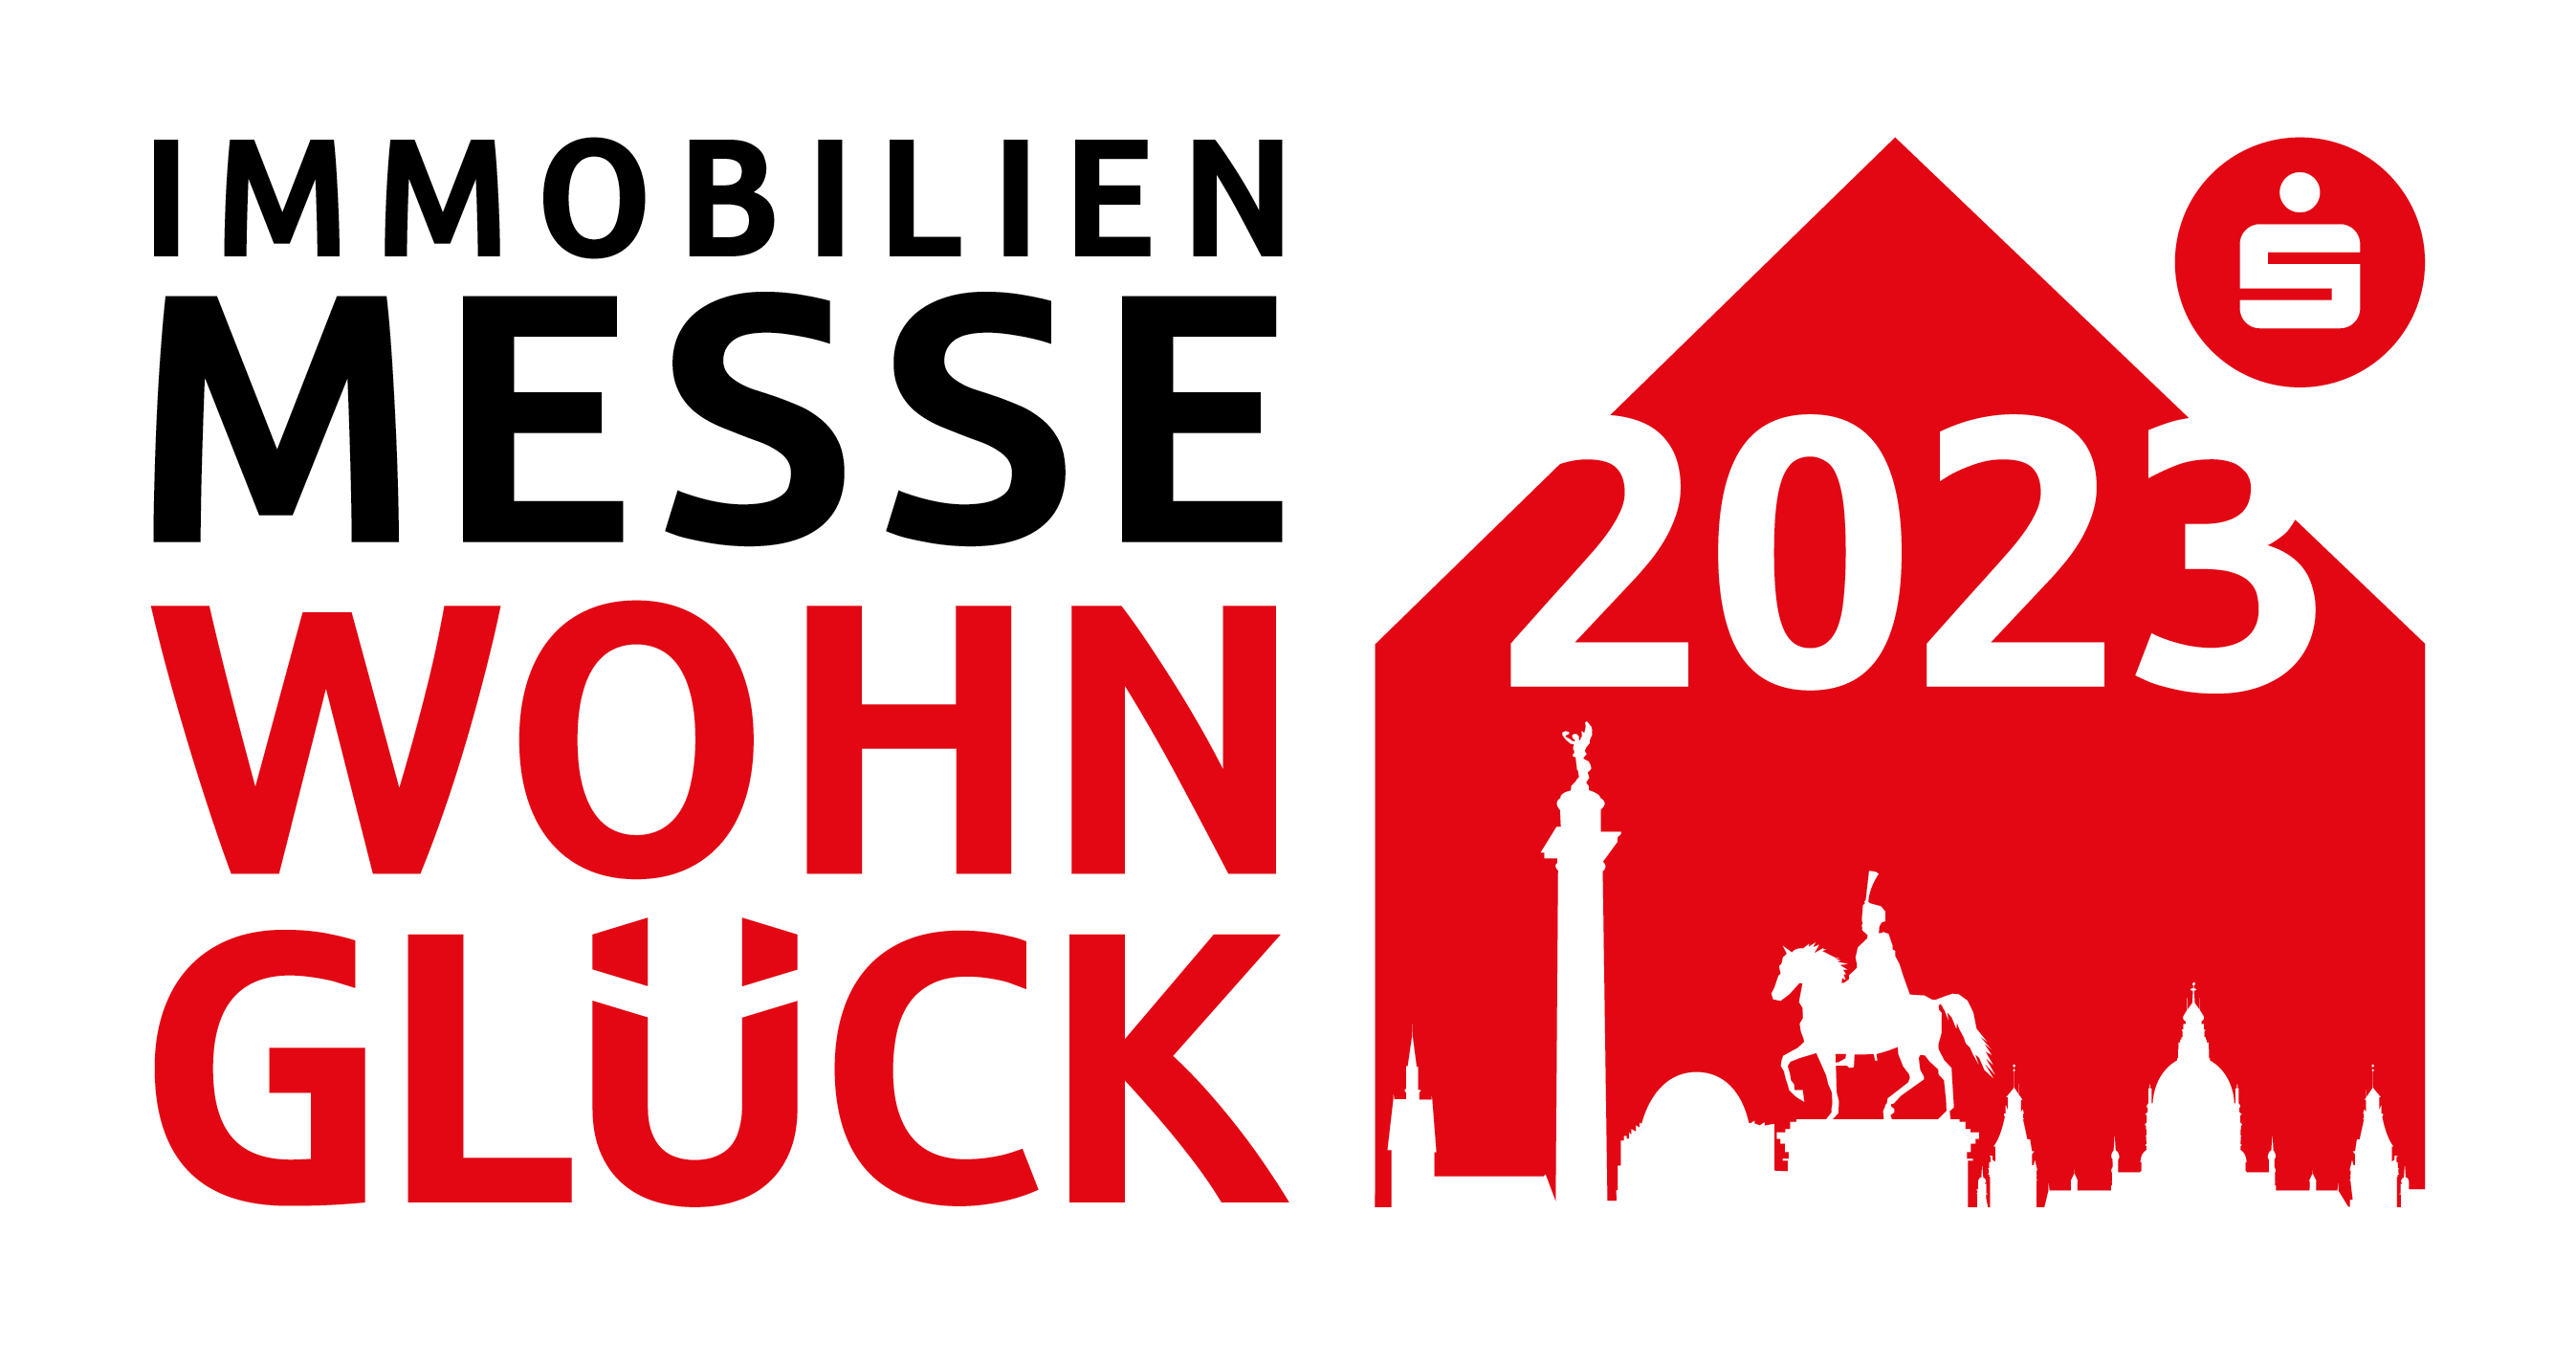 Wohnglück 2023 - Hannovers Immobilienmesse